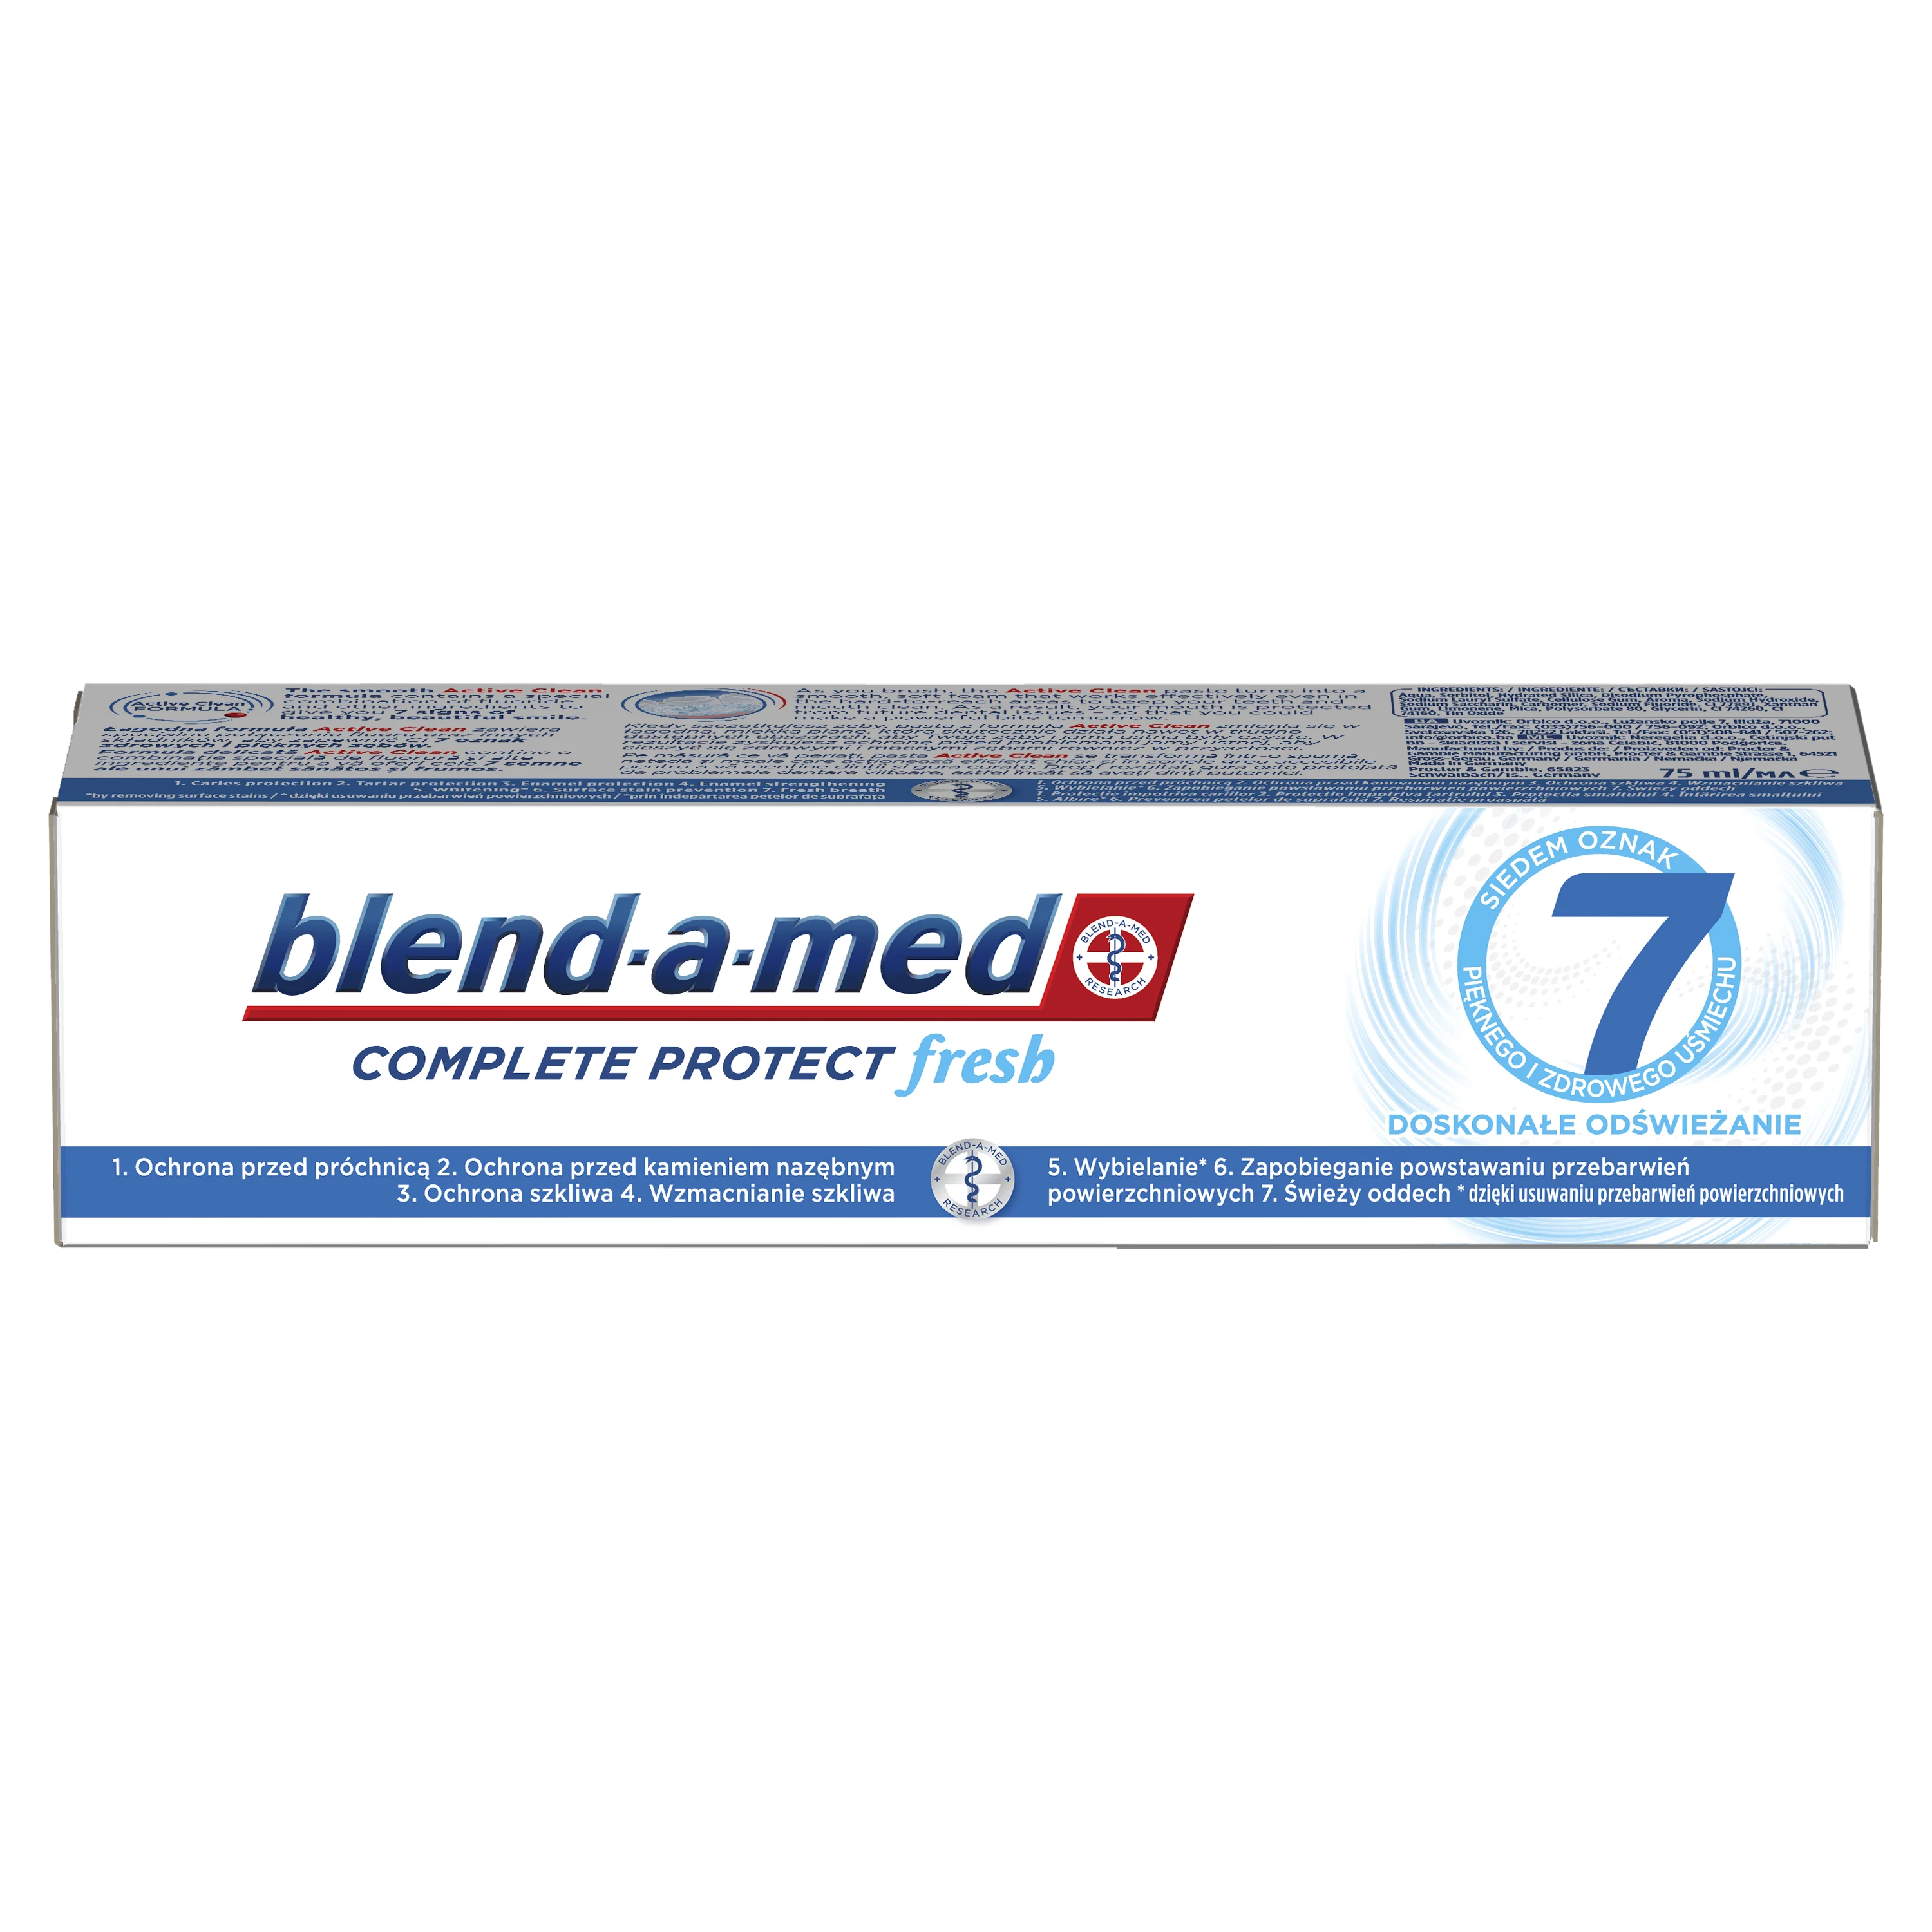 Blend-a-med Complete Protect 7 Extra Fresh Zubní Pasta 